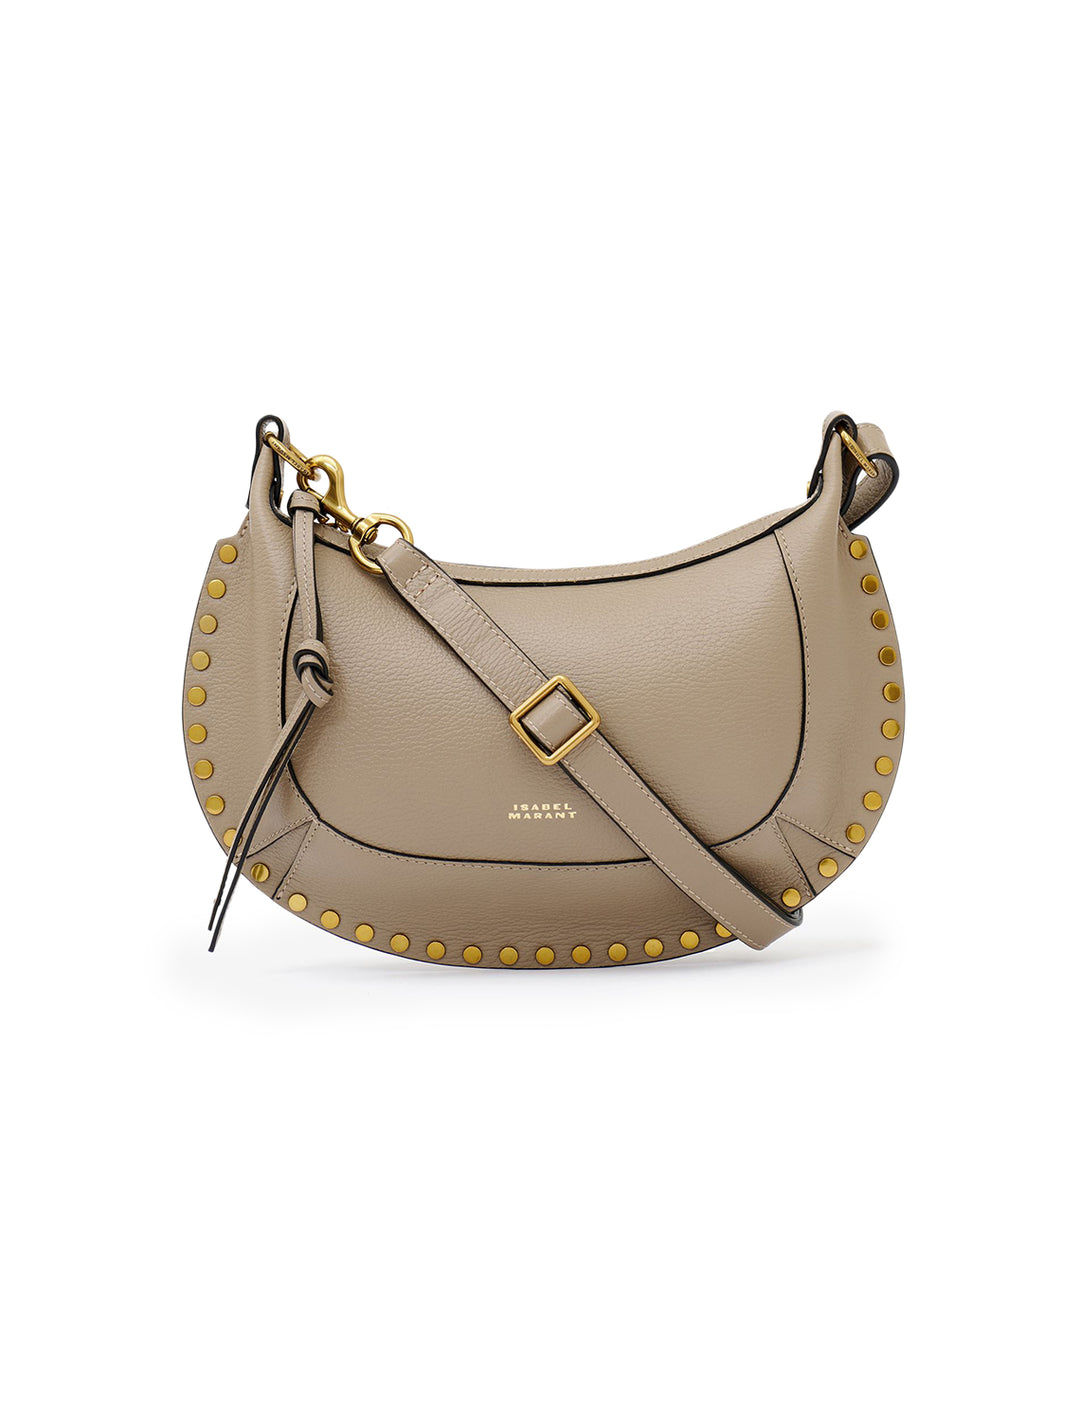 Front view of Isabel Marant Etoile's oksan moon in taupe.